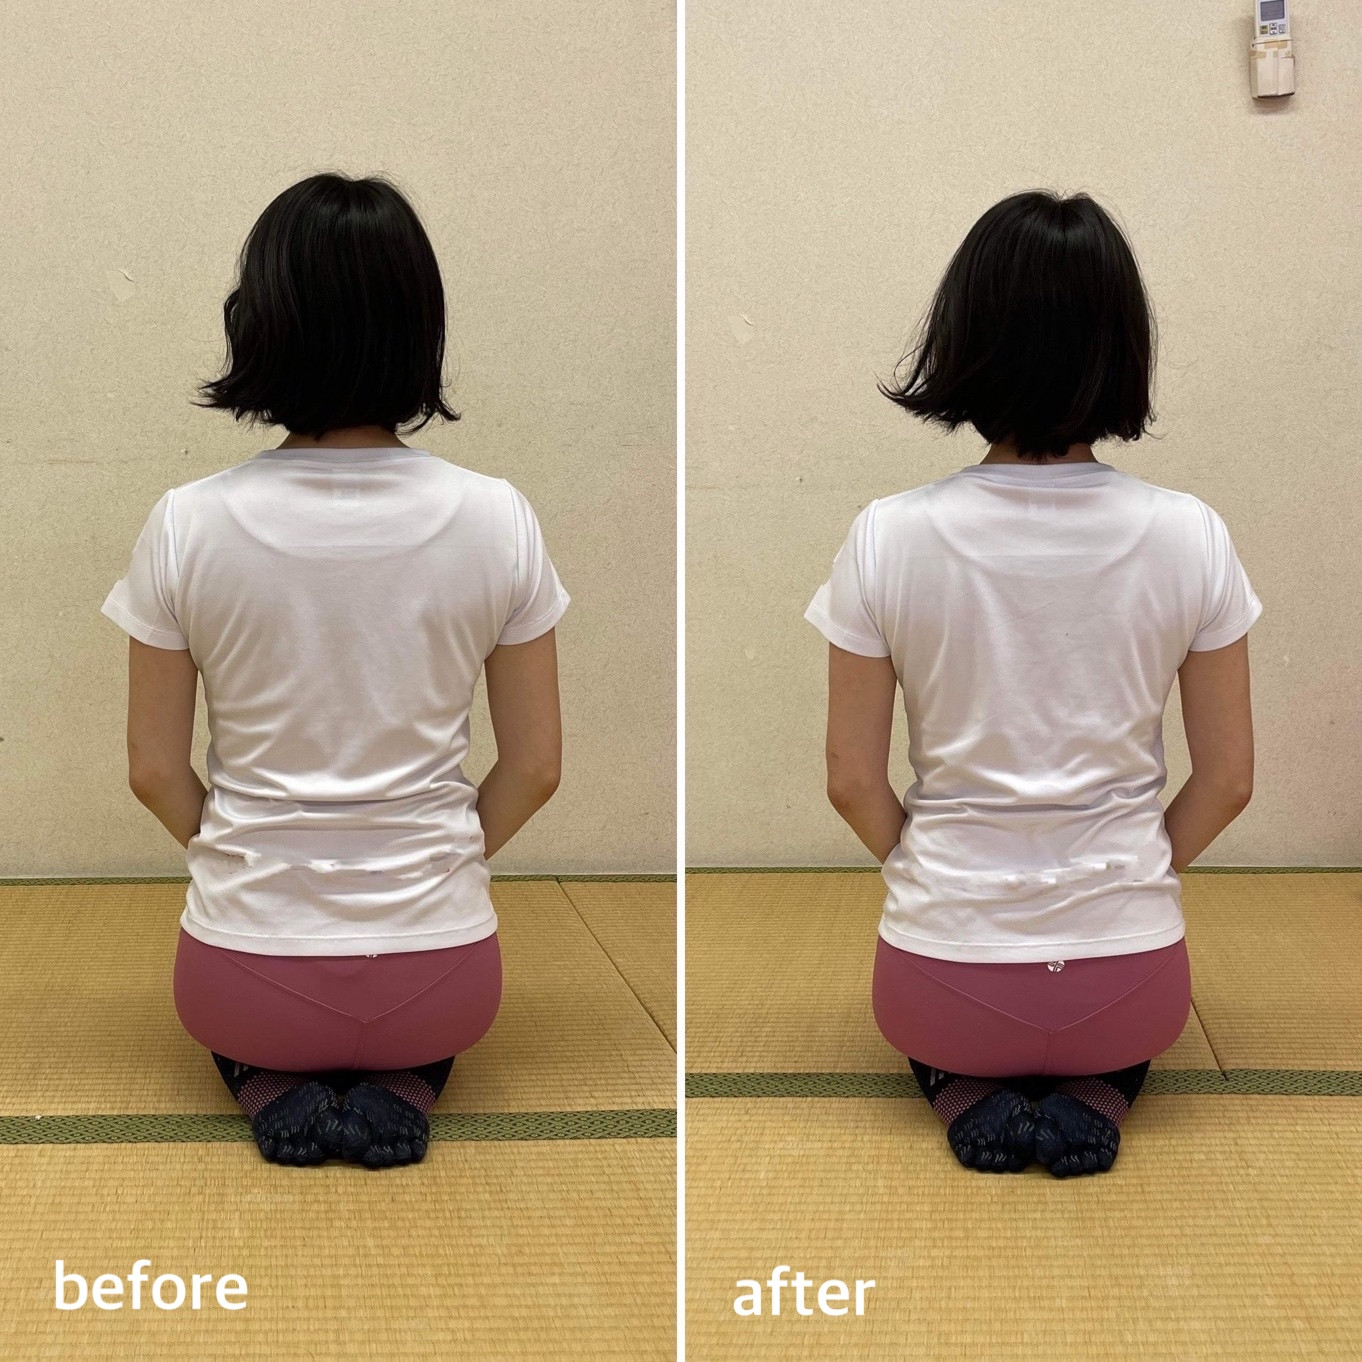 before&after「動きの変化に大興奮」を追加しました。